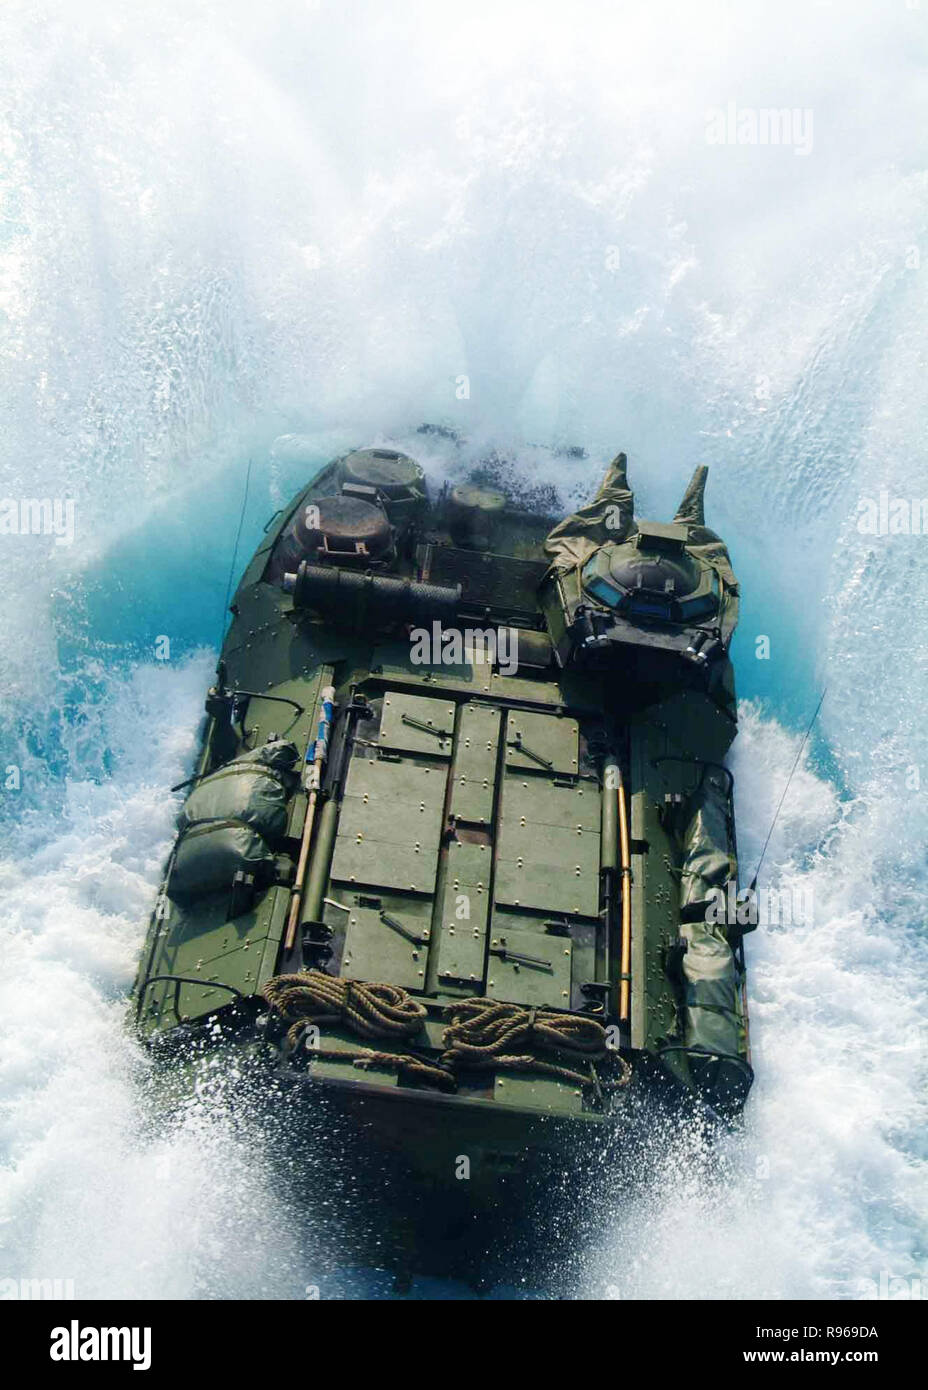 An amphibious assault vehicle launches from the well deck of the USS Harpers Ferry (LSD 49) off the coast of Okinawa, Japan.  DoD photo by Petty Officer 3rd Class Mark Alvarez, U.S. Navy. Stock Photo